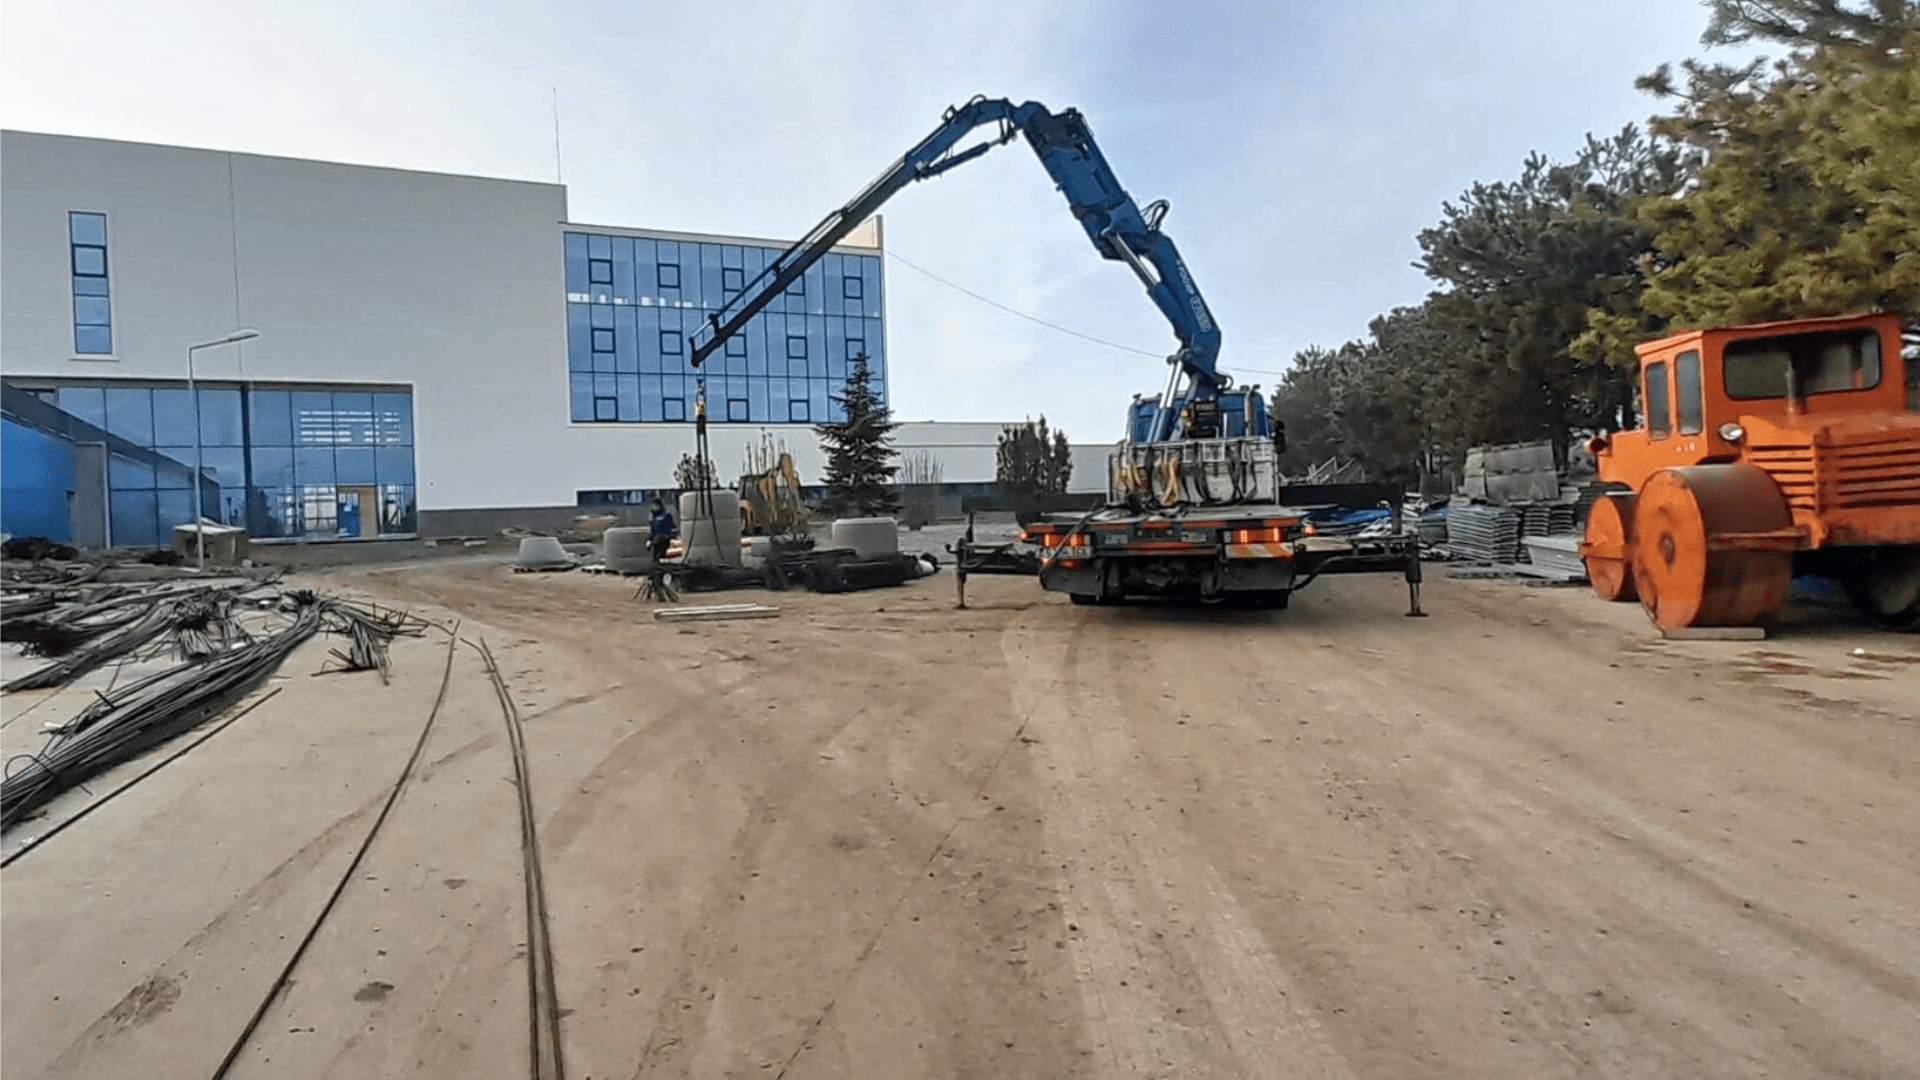 Transporting irons using truck crane for rent